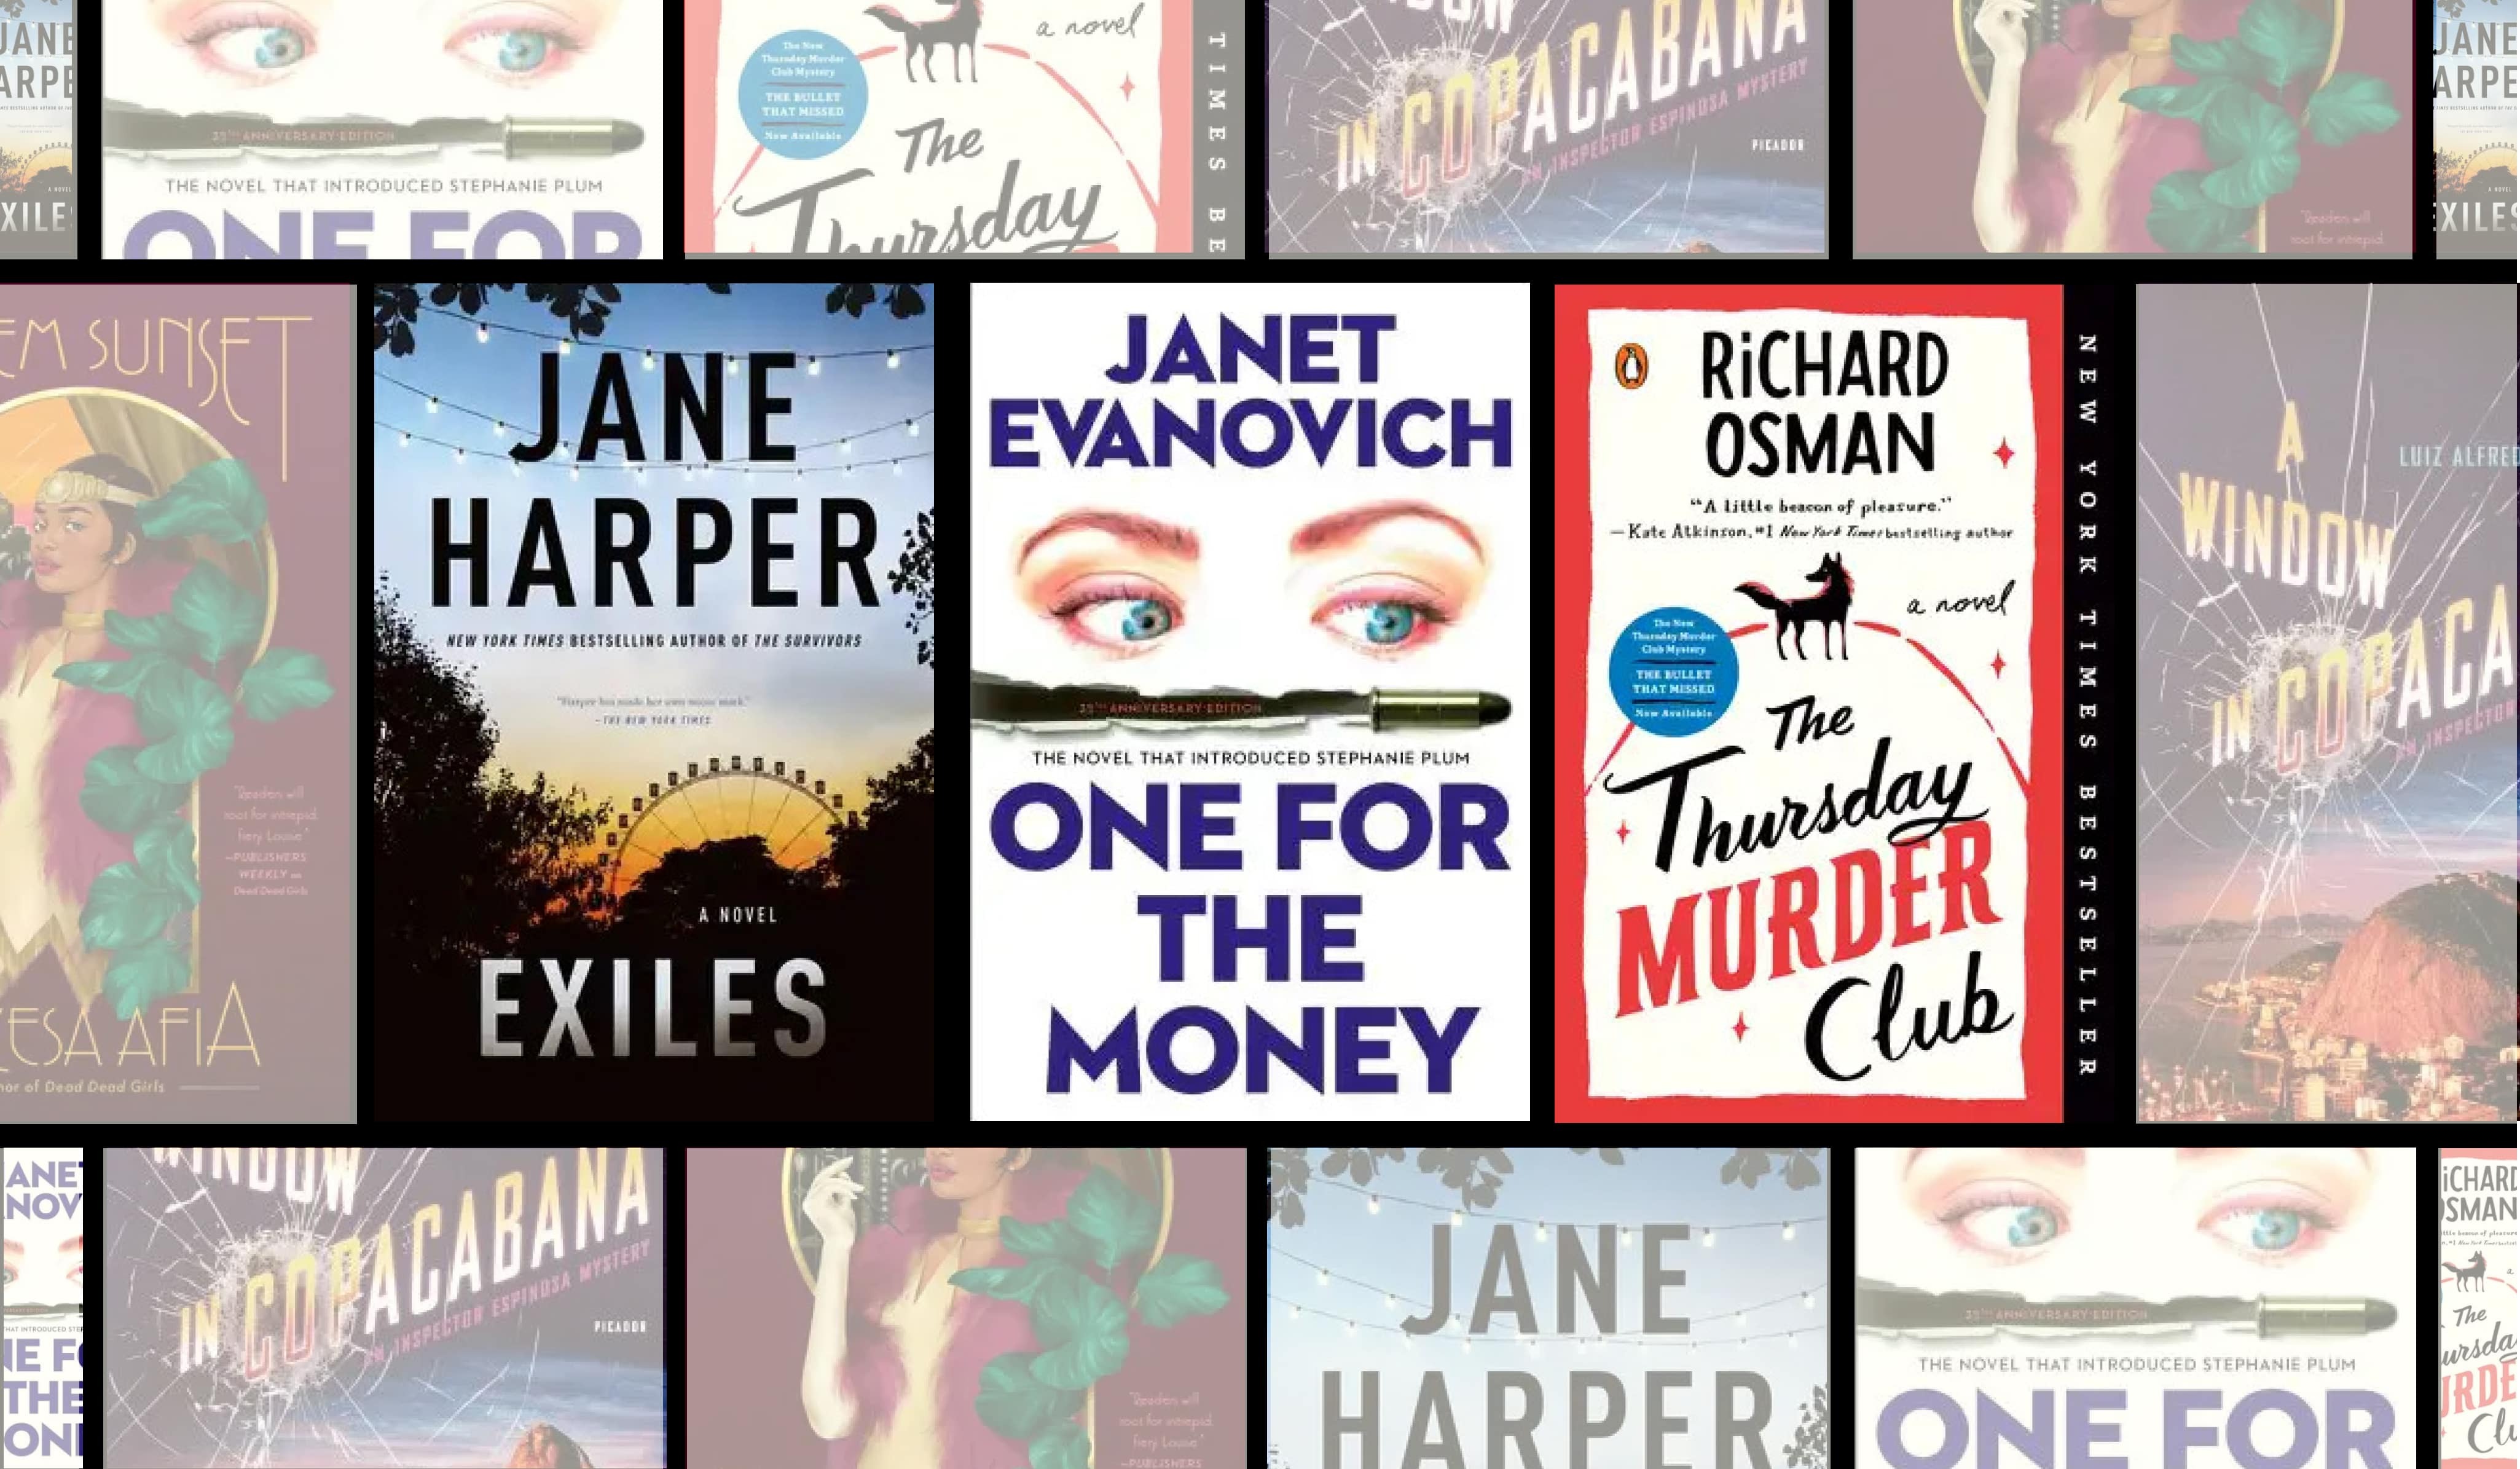 Article image for: The Top 8 Mystery Series to Binge Read This Summer